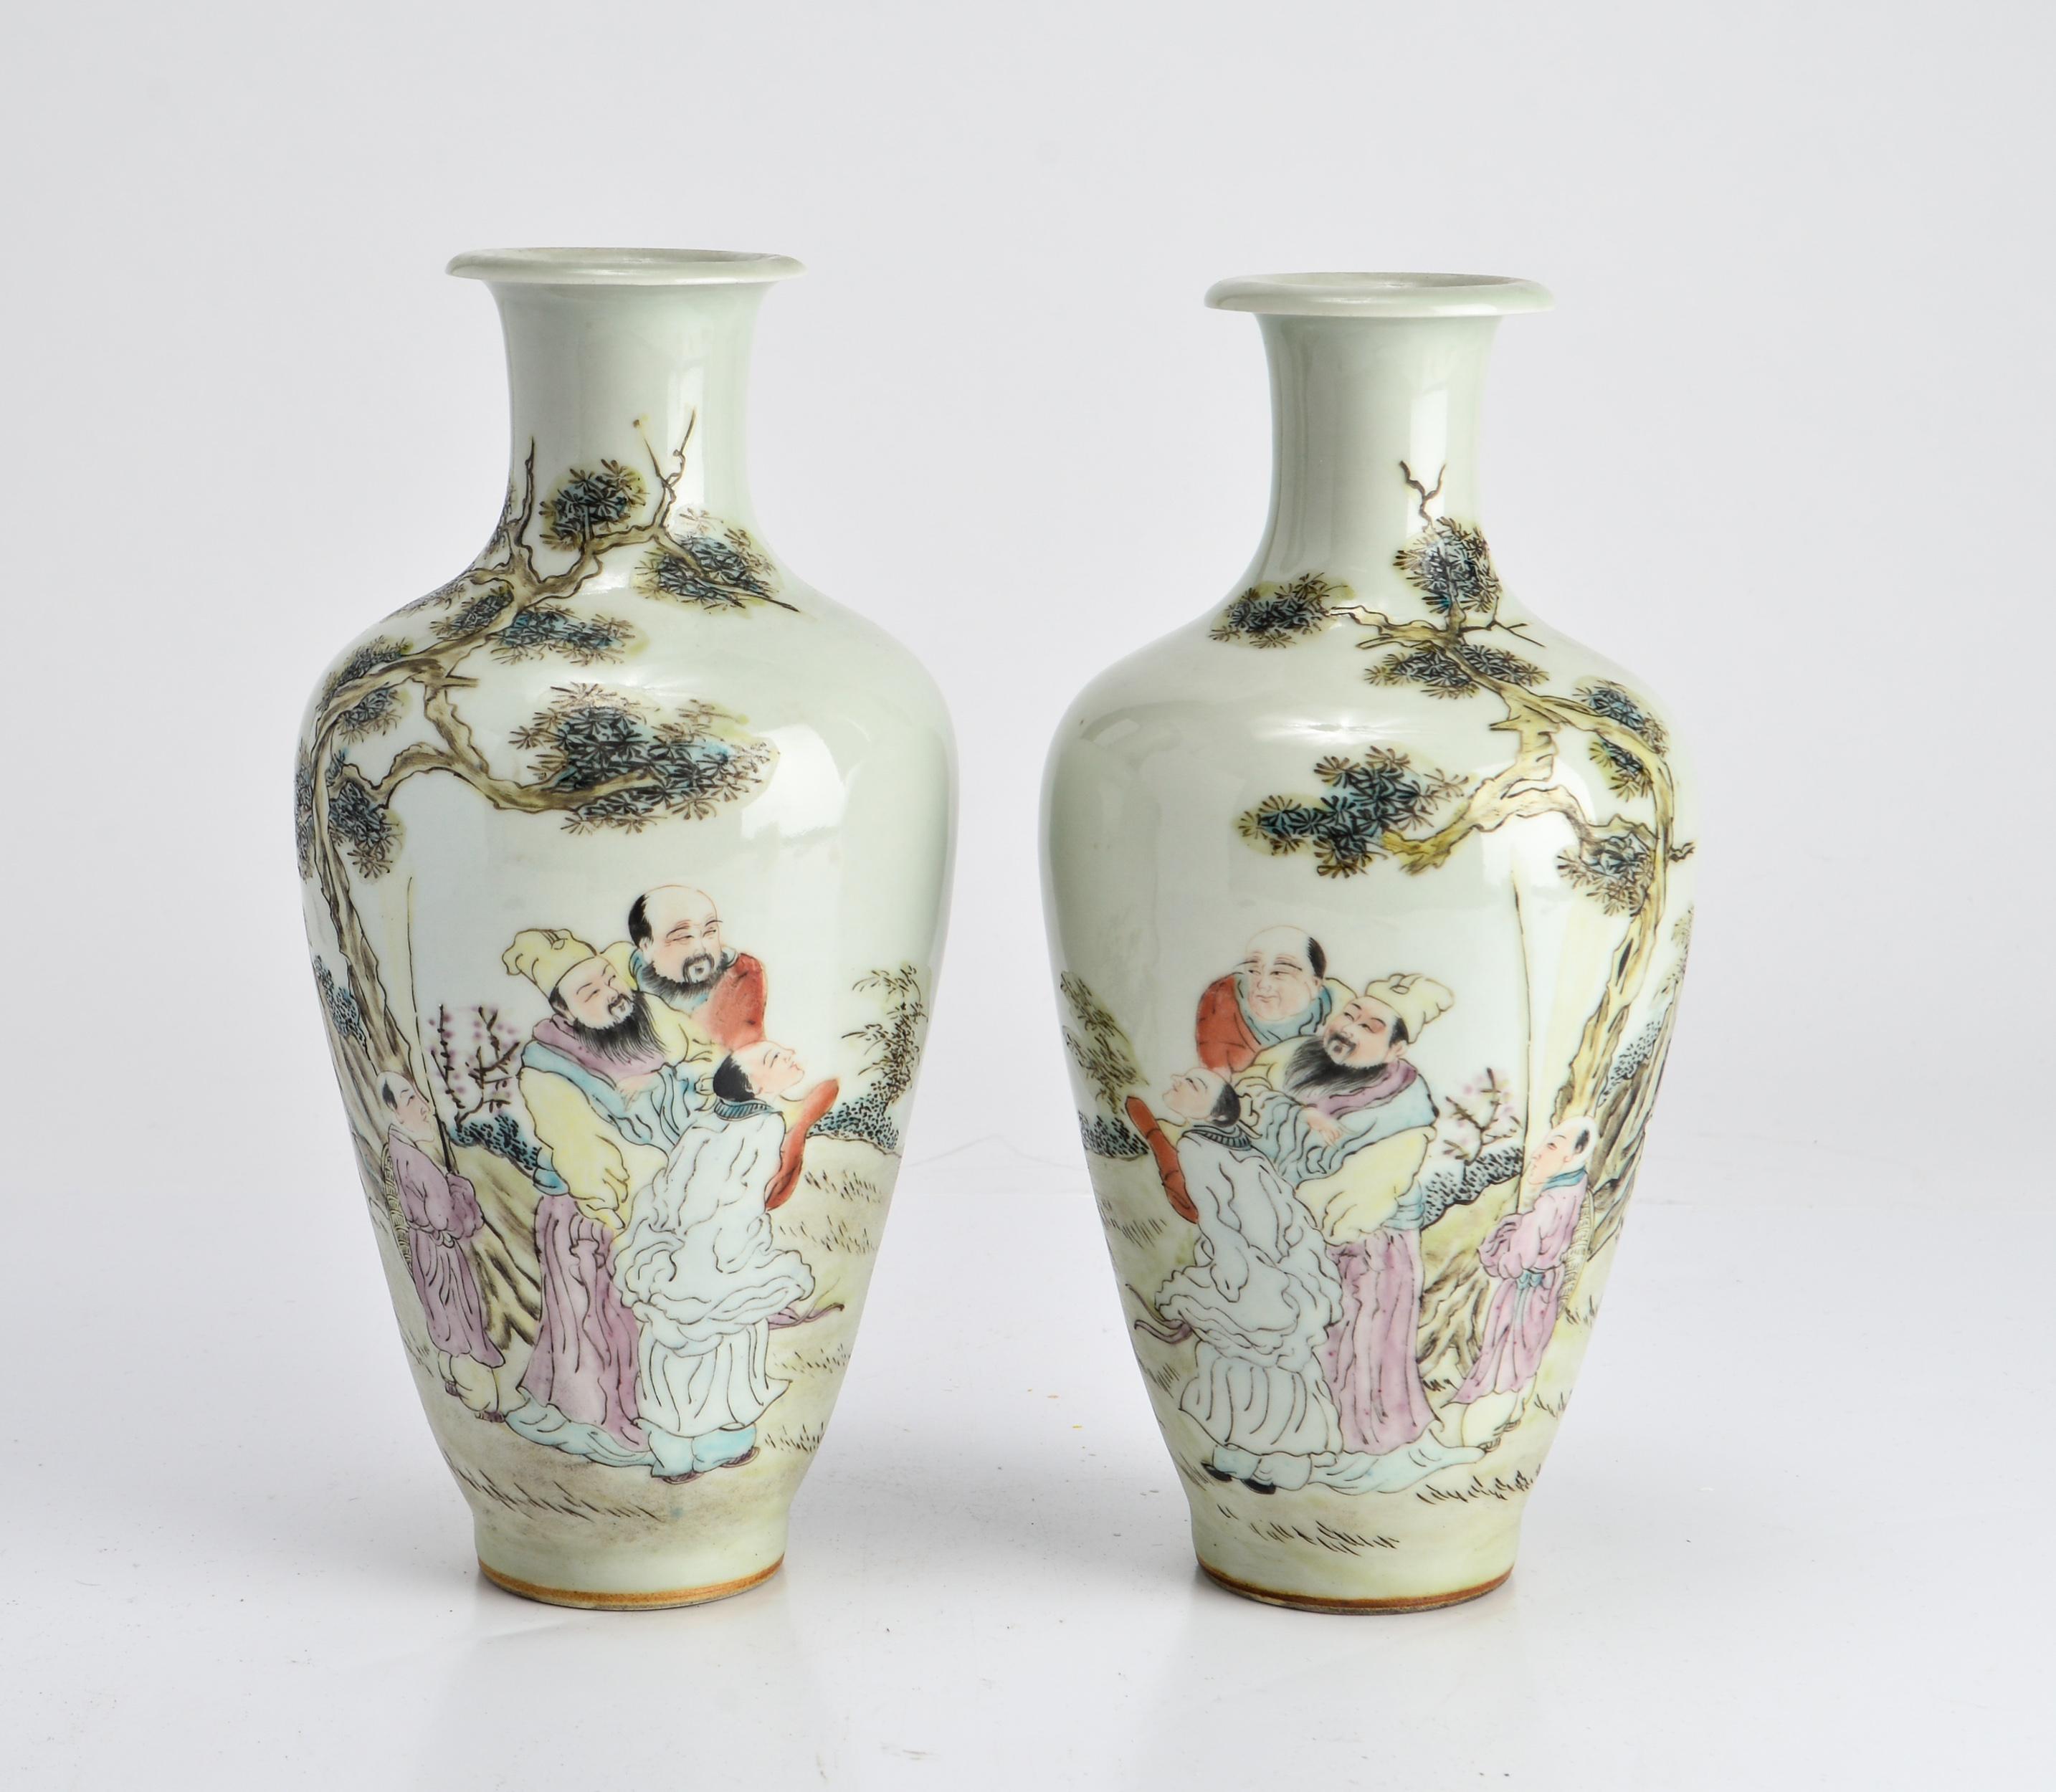 Pair of Chinese porcelain baluster vases, the body of each depicting scenes with robed scholars conversing amidst rockwork under pine trees. Reverse side with writing. In great vintage condition with age-appropriate wear and use.